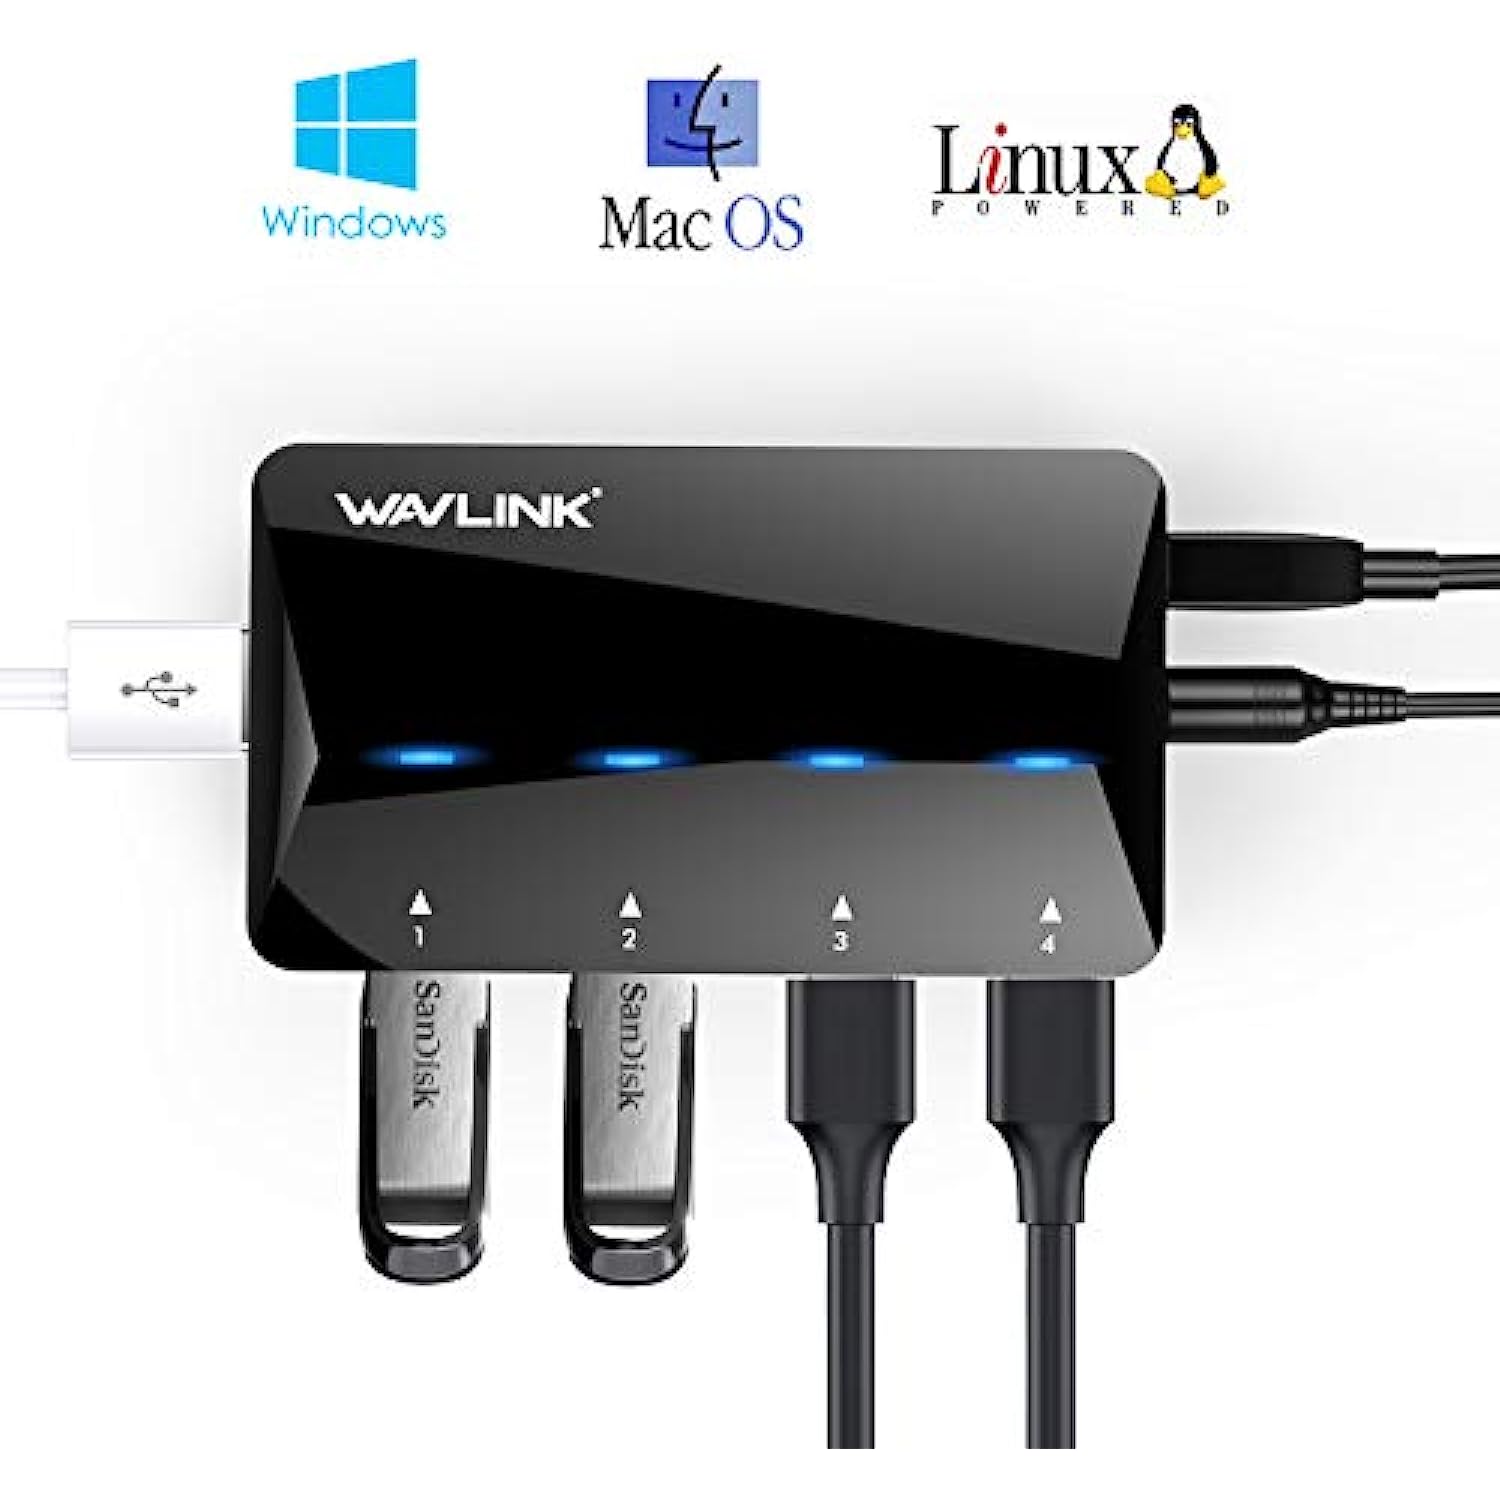 7-in-1 Type A Adapter with 4 USB 3.0 Data Ports, Smart Charging Port, USB B Port, DC Power Jack for Windows XP/Vista/7/8/10 & MAC 10.1 Above